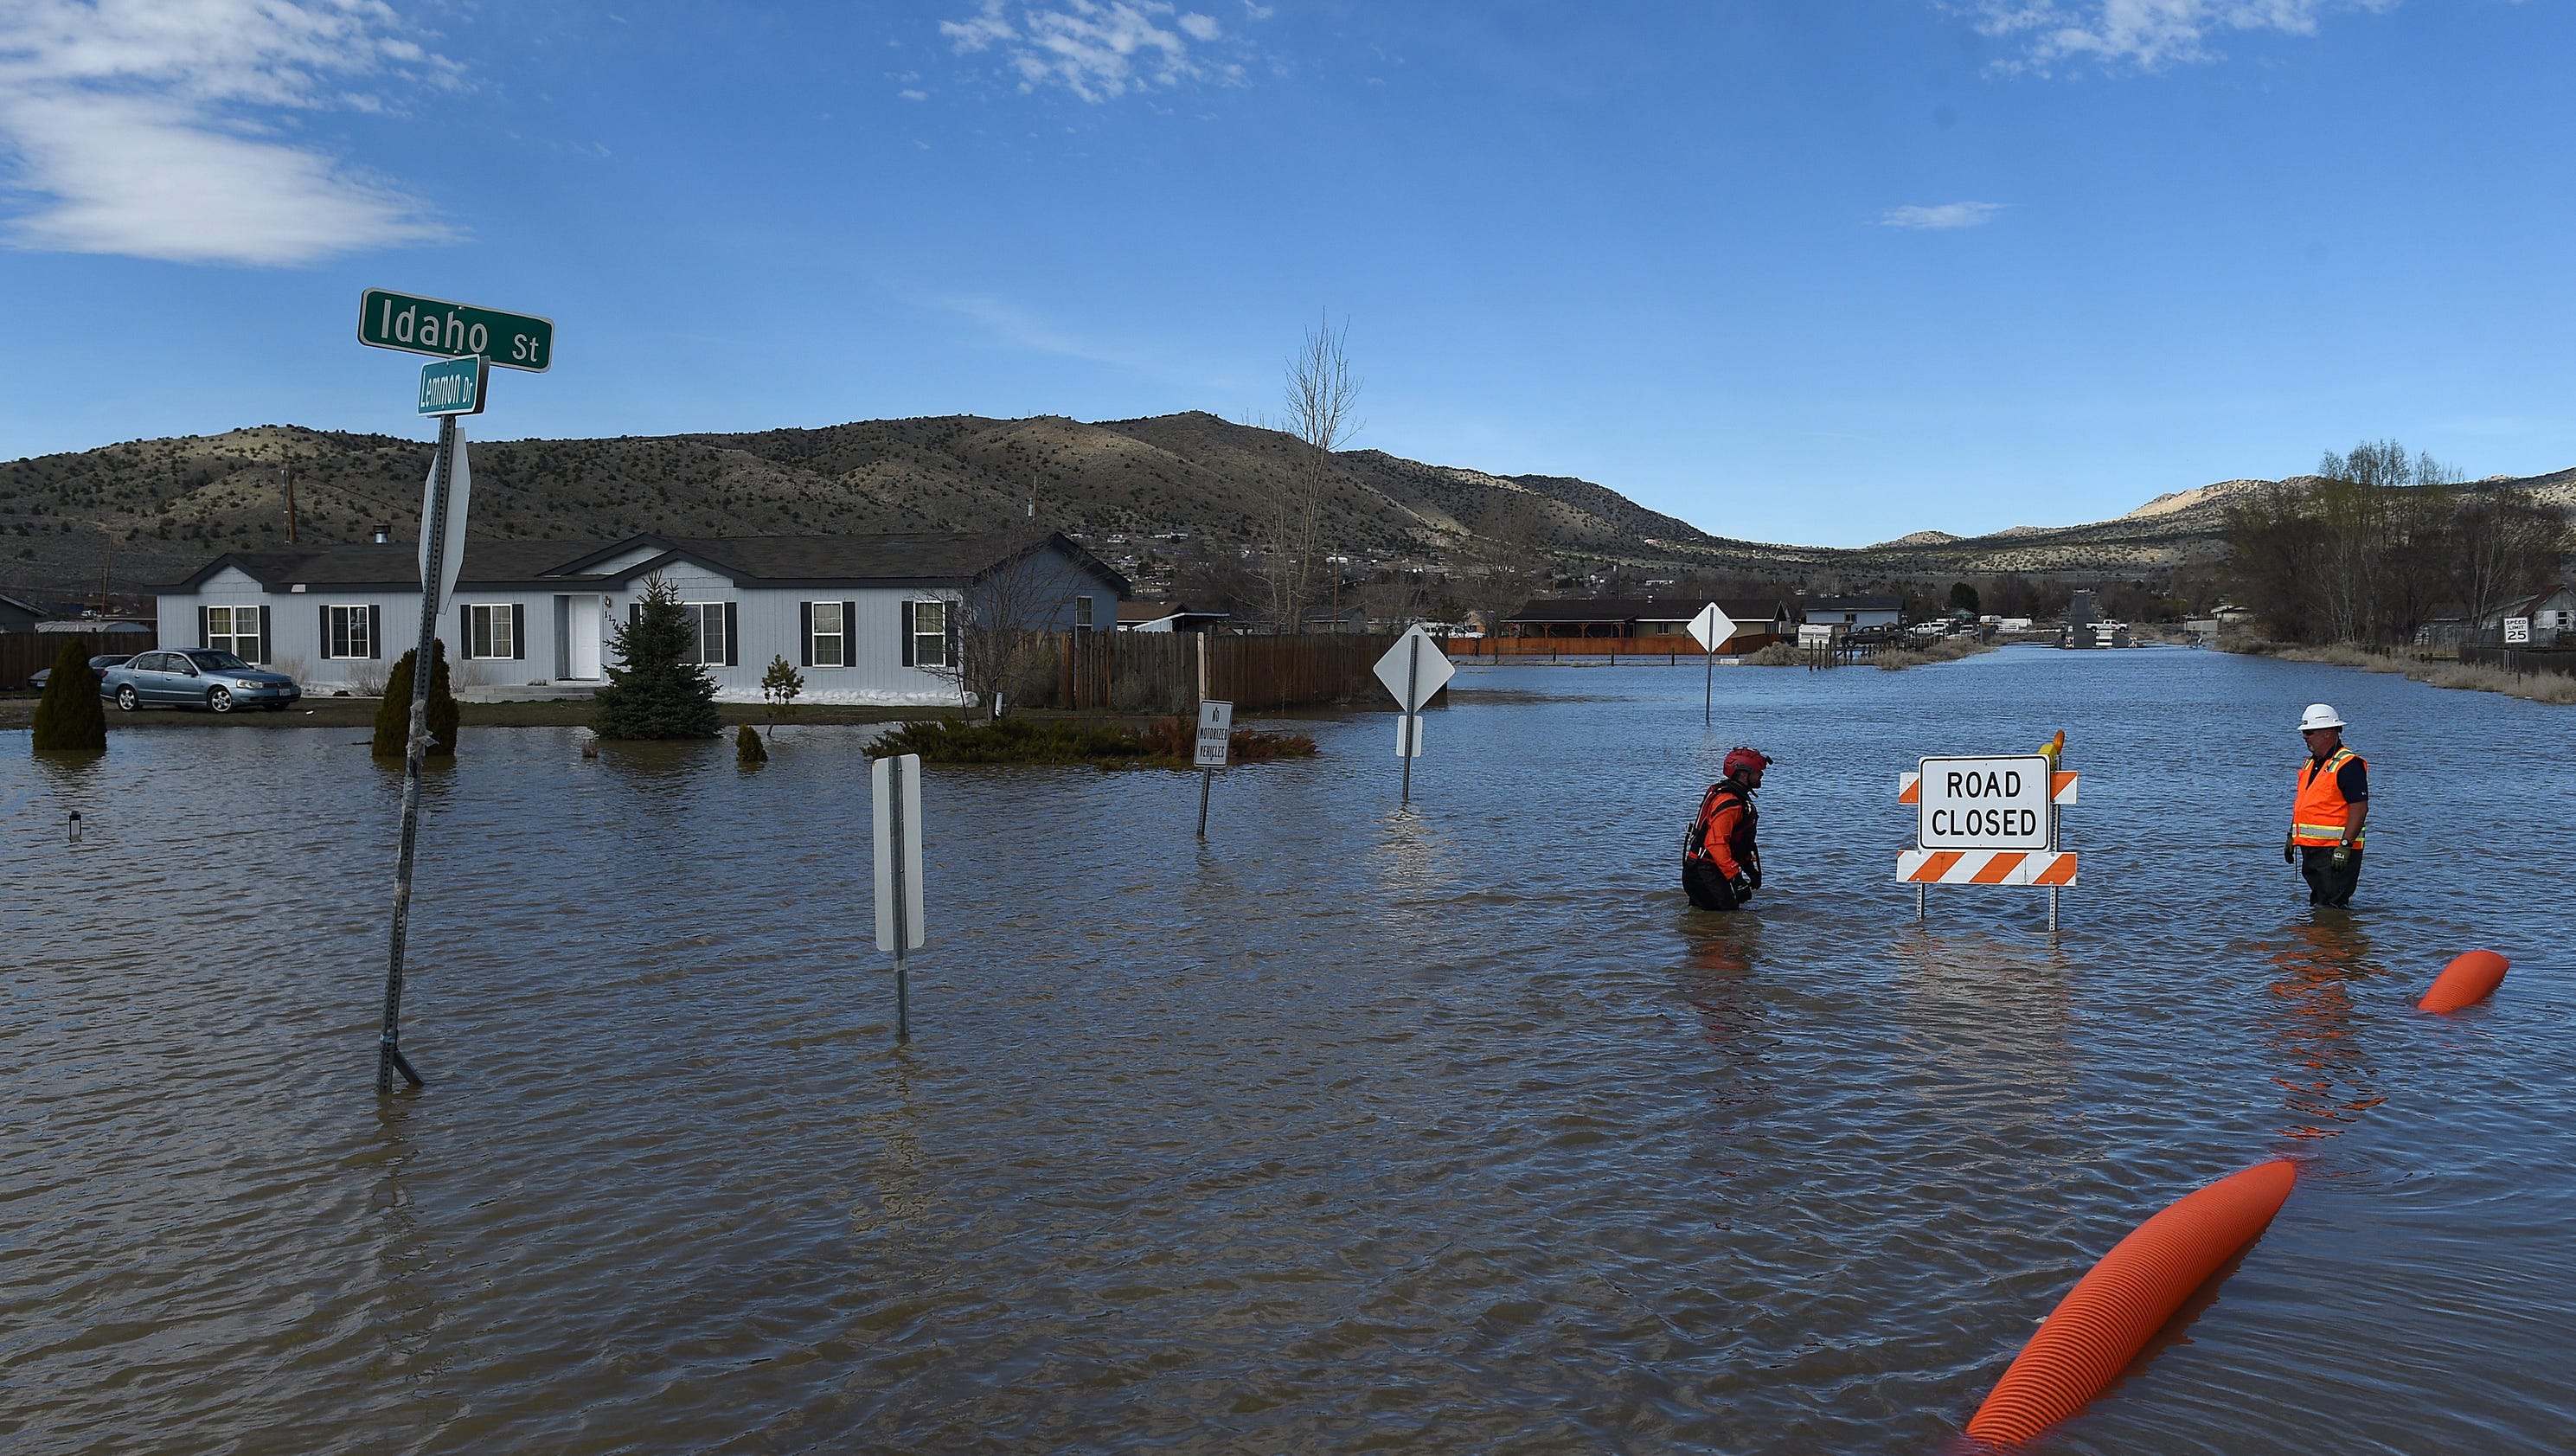 Photos: Crews work to remove flood water from Lemmon Valley3200 x 1680